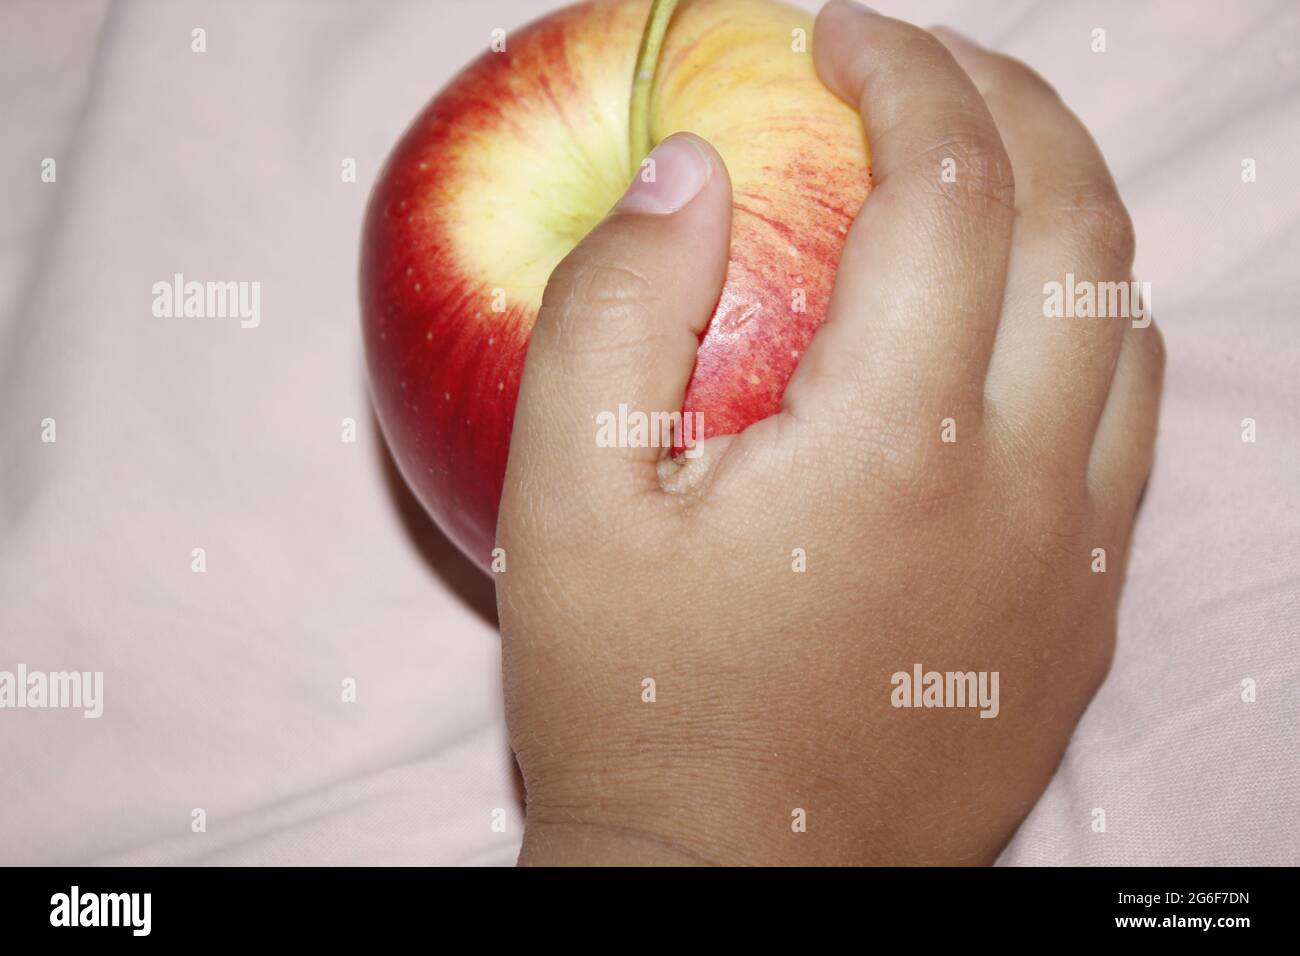 A little child eating a red apple. Stock Photo